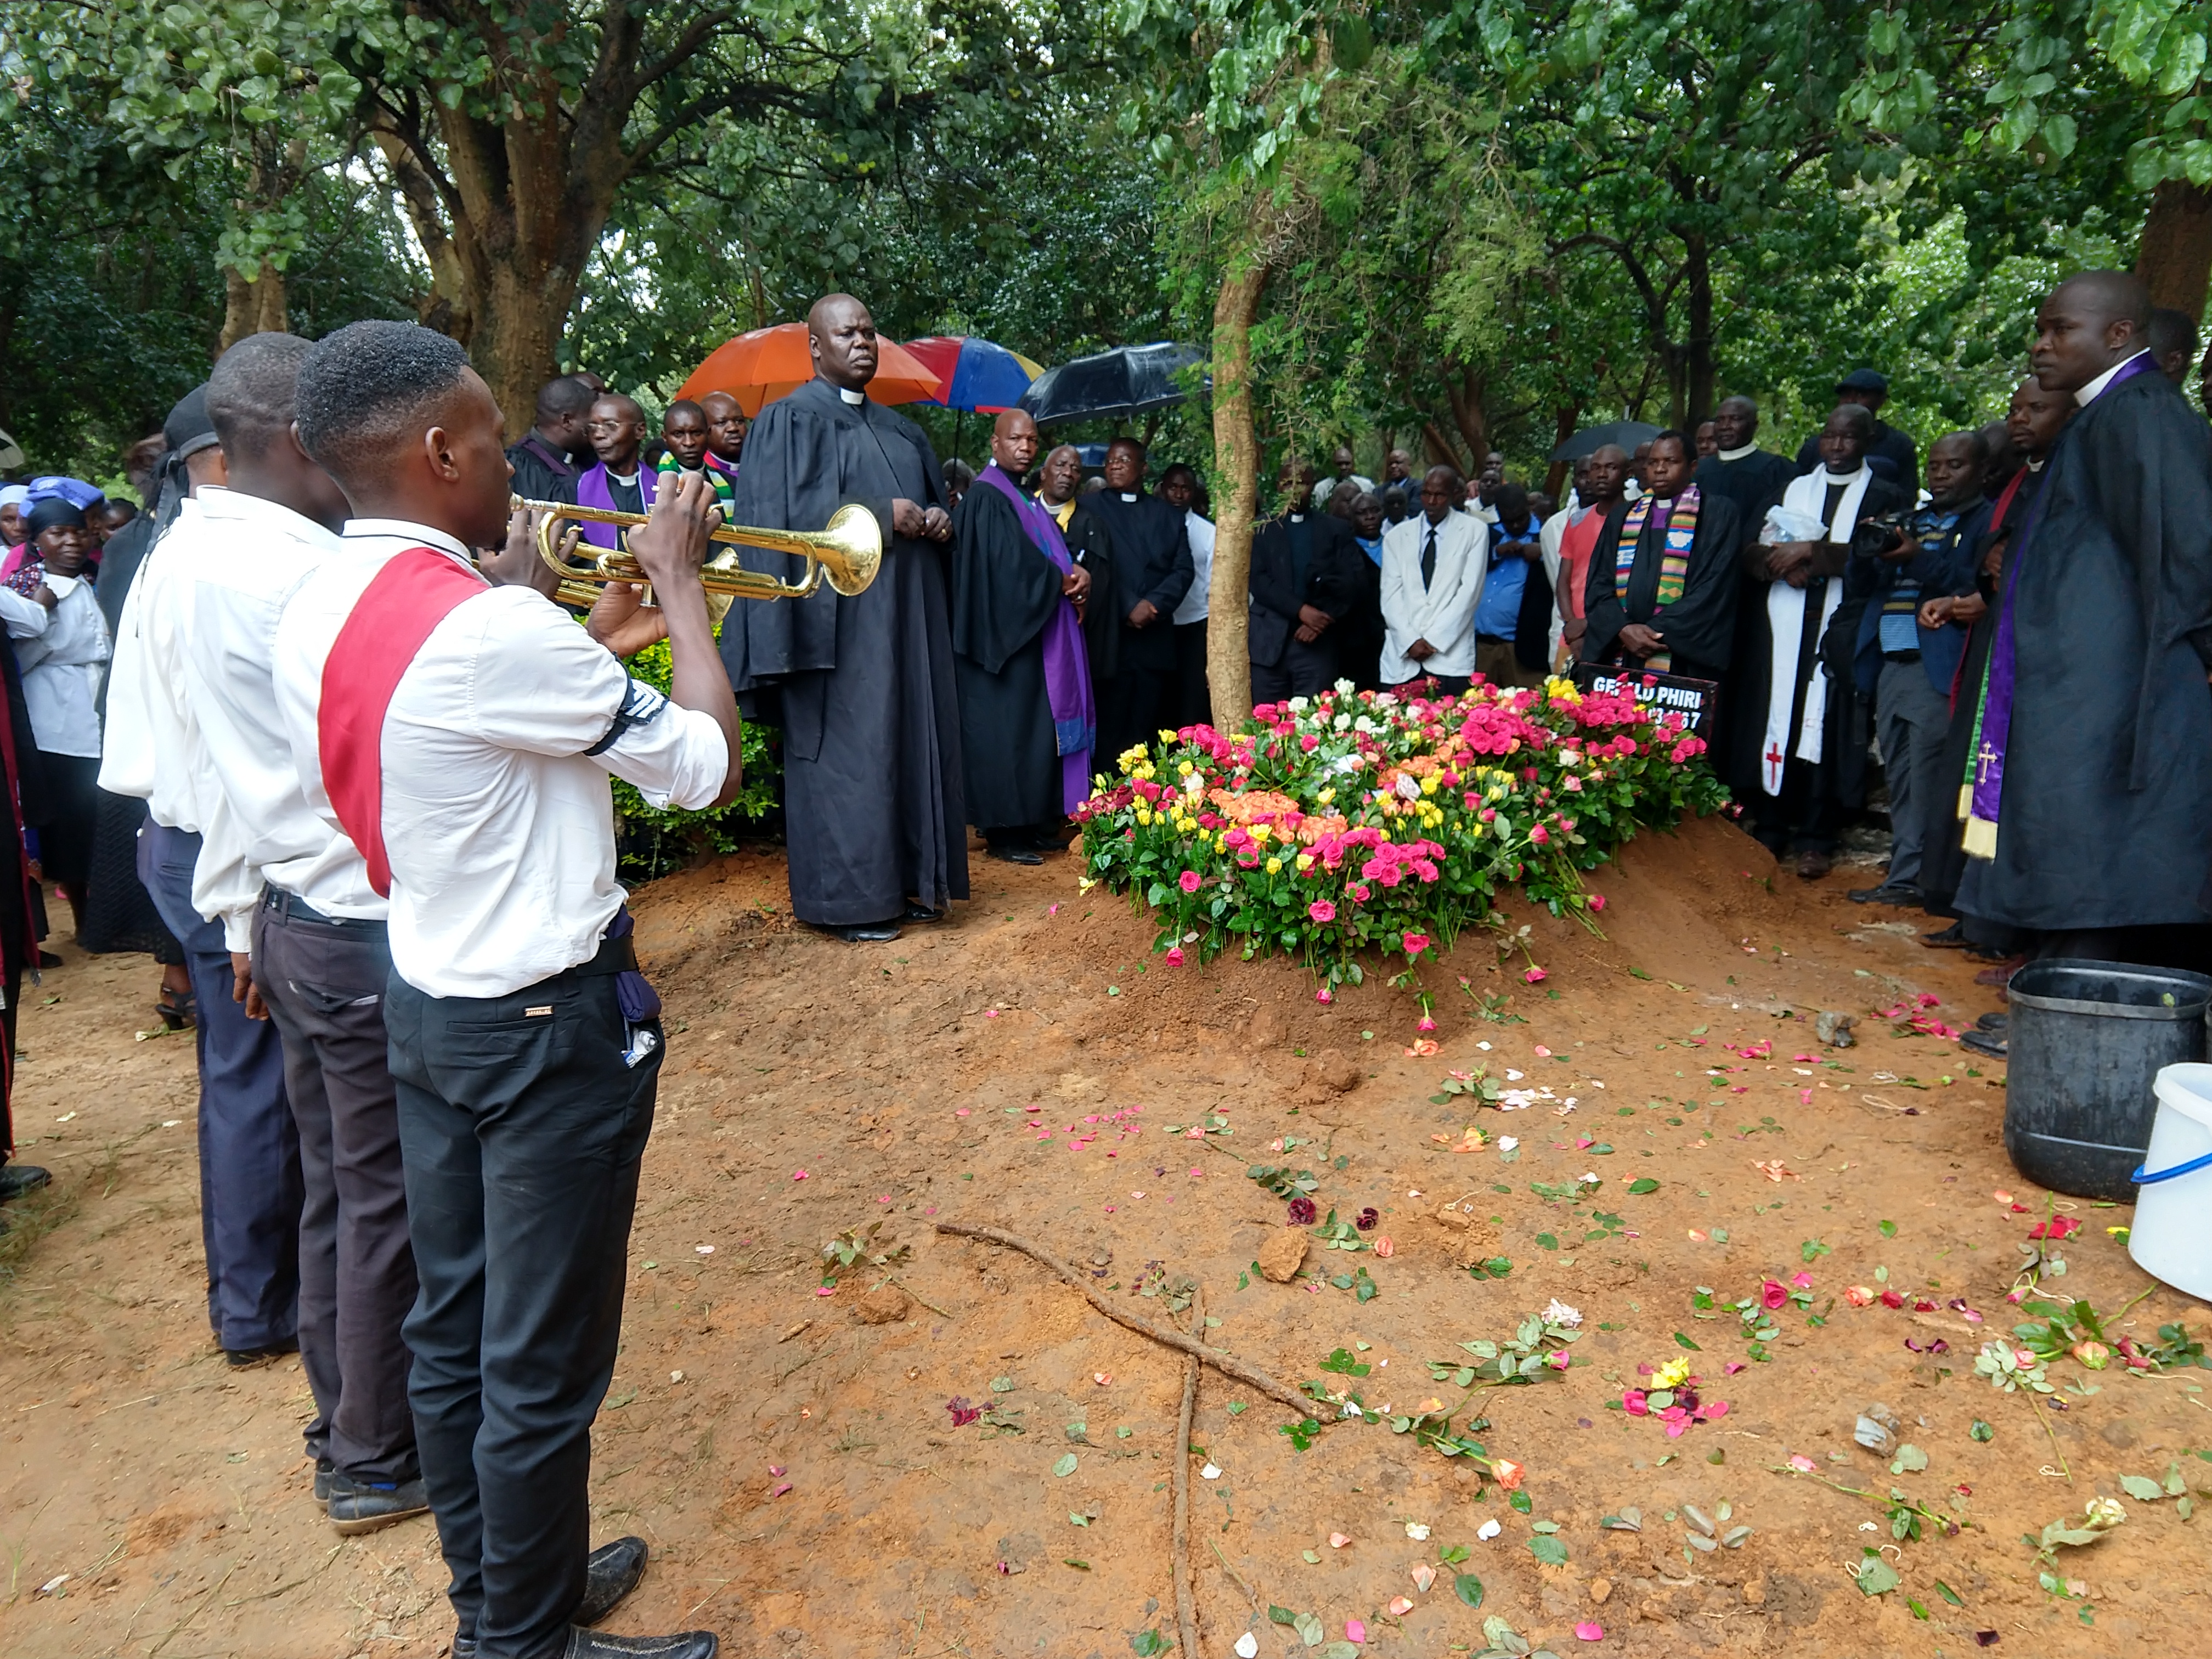 Final goodbye for Rev. Gerald Phiri. It is traditional for friends and loved ones to insert flowers into the earth covering the grave.